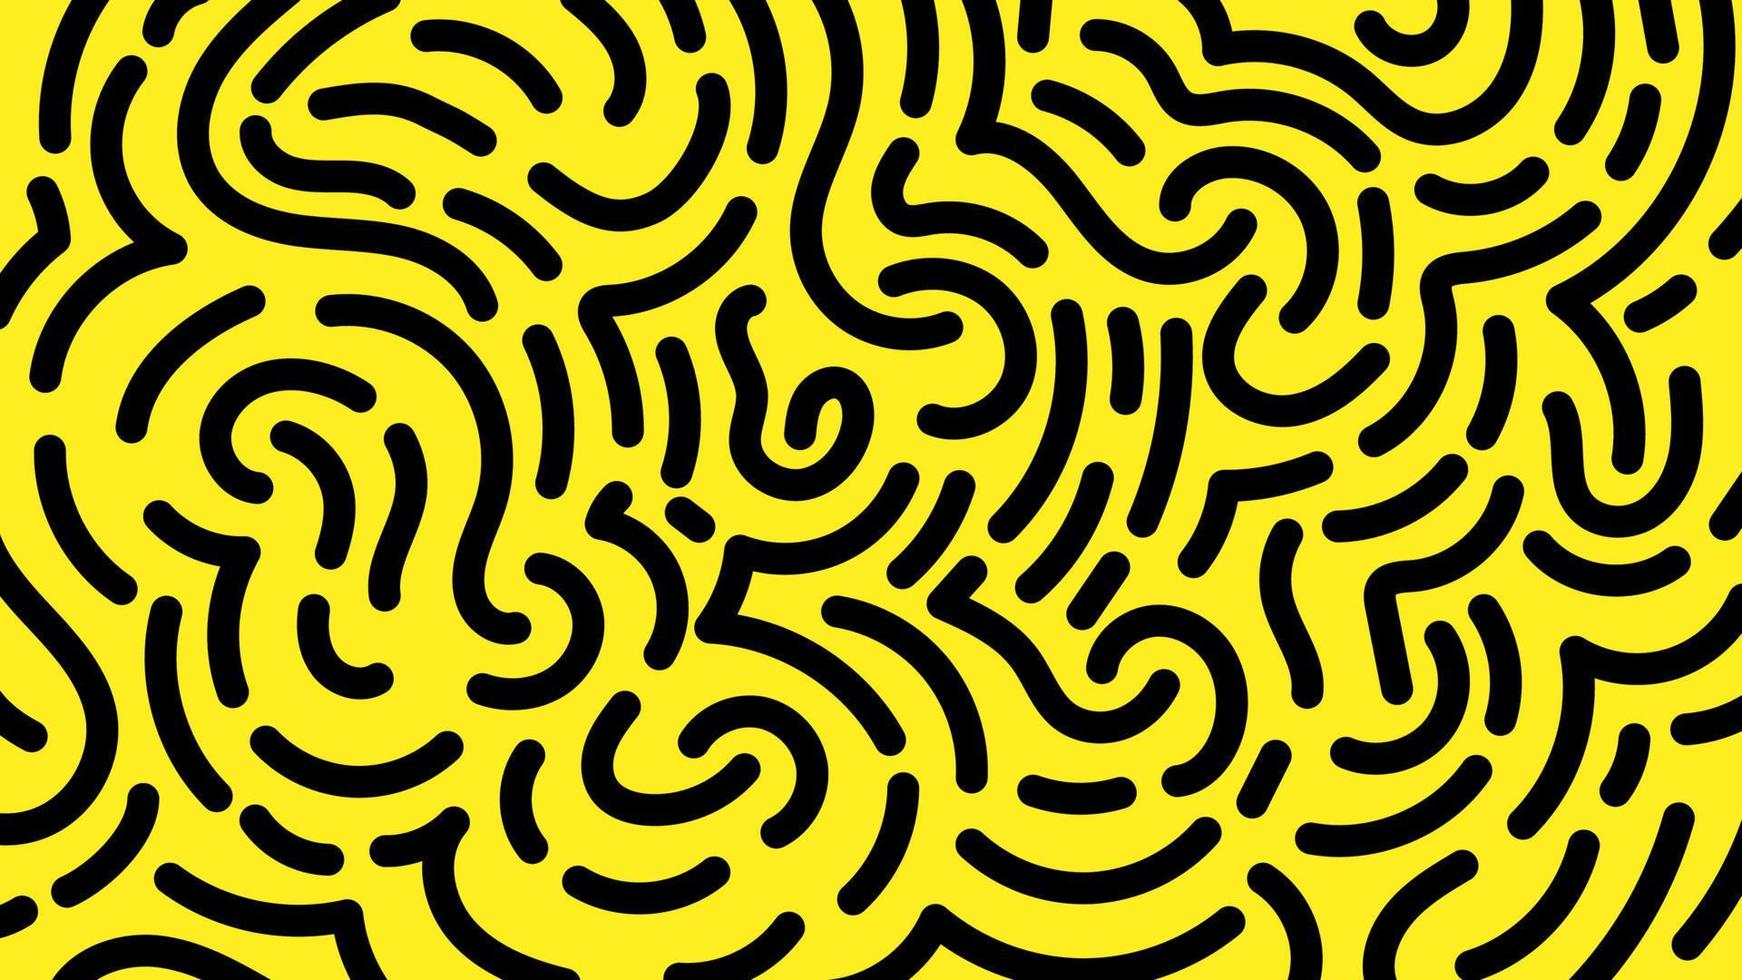 Organic rounded jumble maze lines vector background